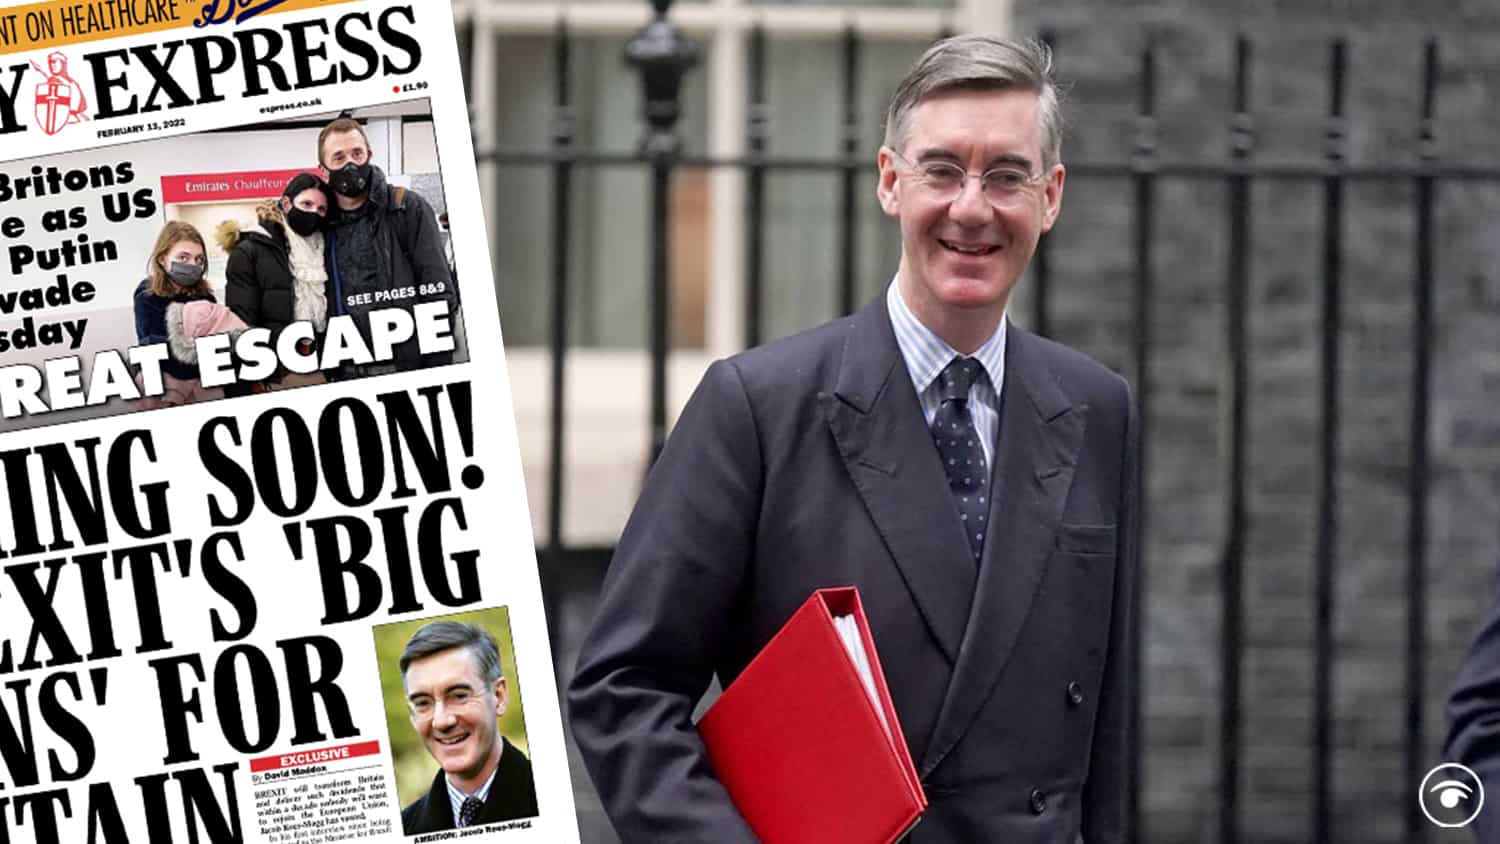 Rees-Mogg touts scrapping EU vacuum cleaner laws as top Brexit benefit